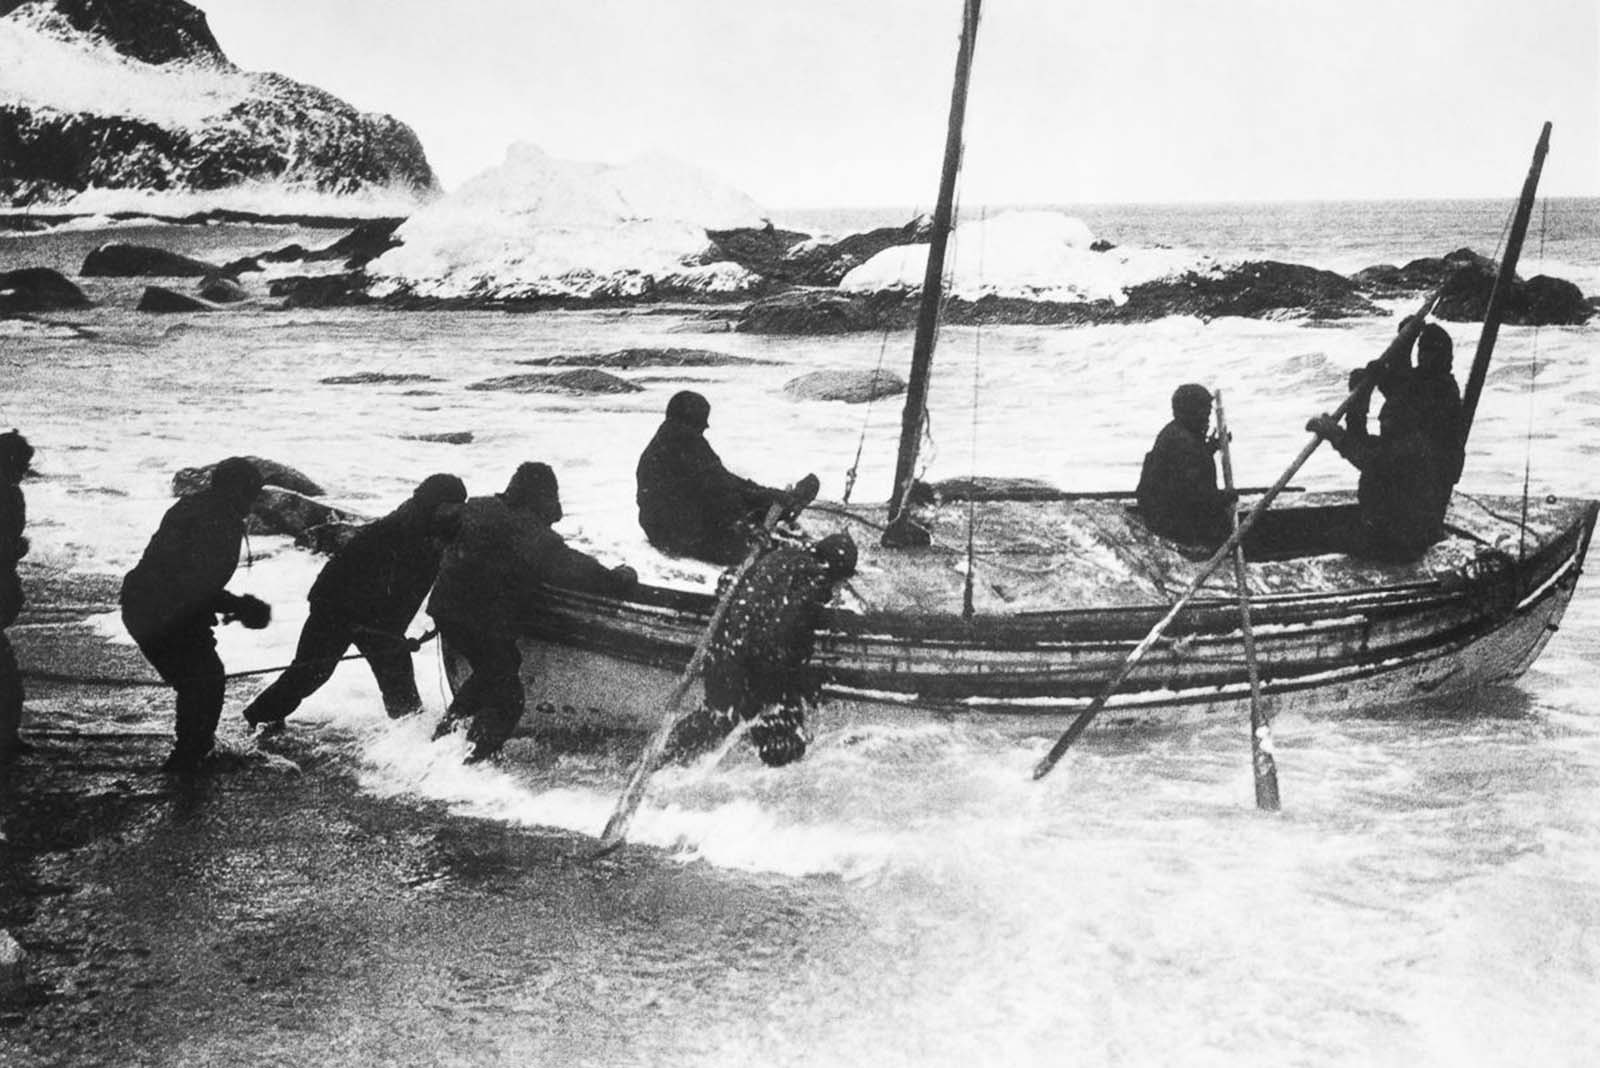 The James Caird is launched from Elephant Island on a mission to reach South Georgia Island.